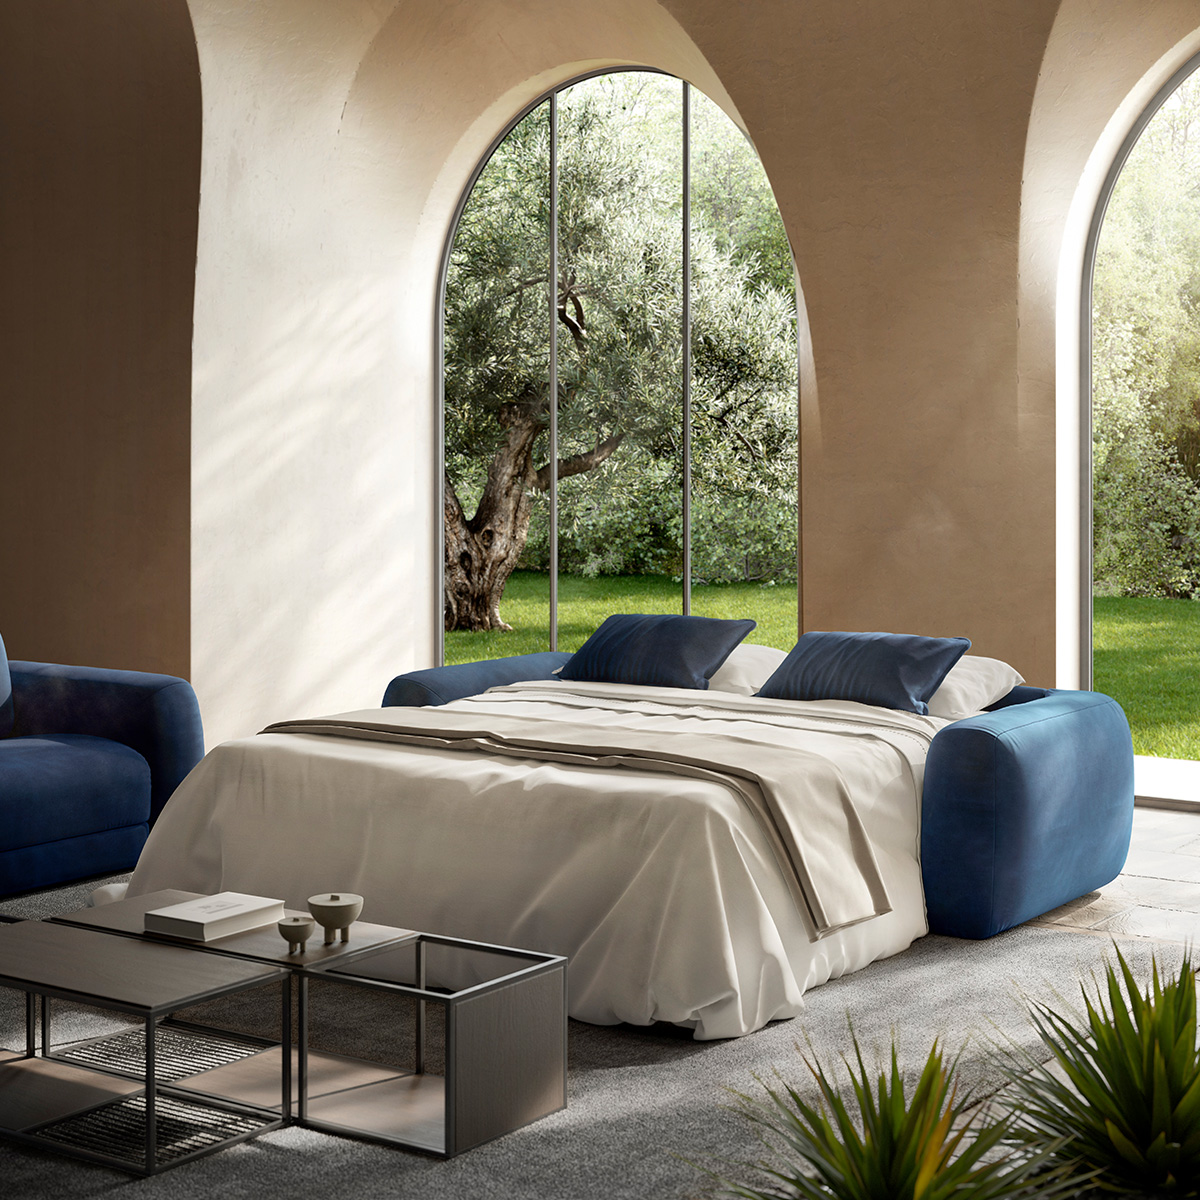 Natuzzi editorial - Mecanismo "ready-to-bed"